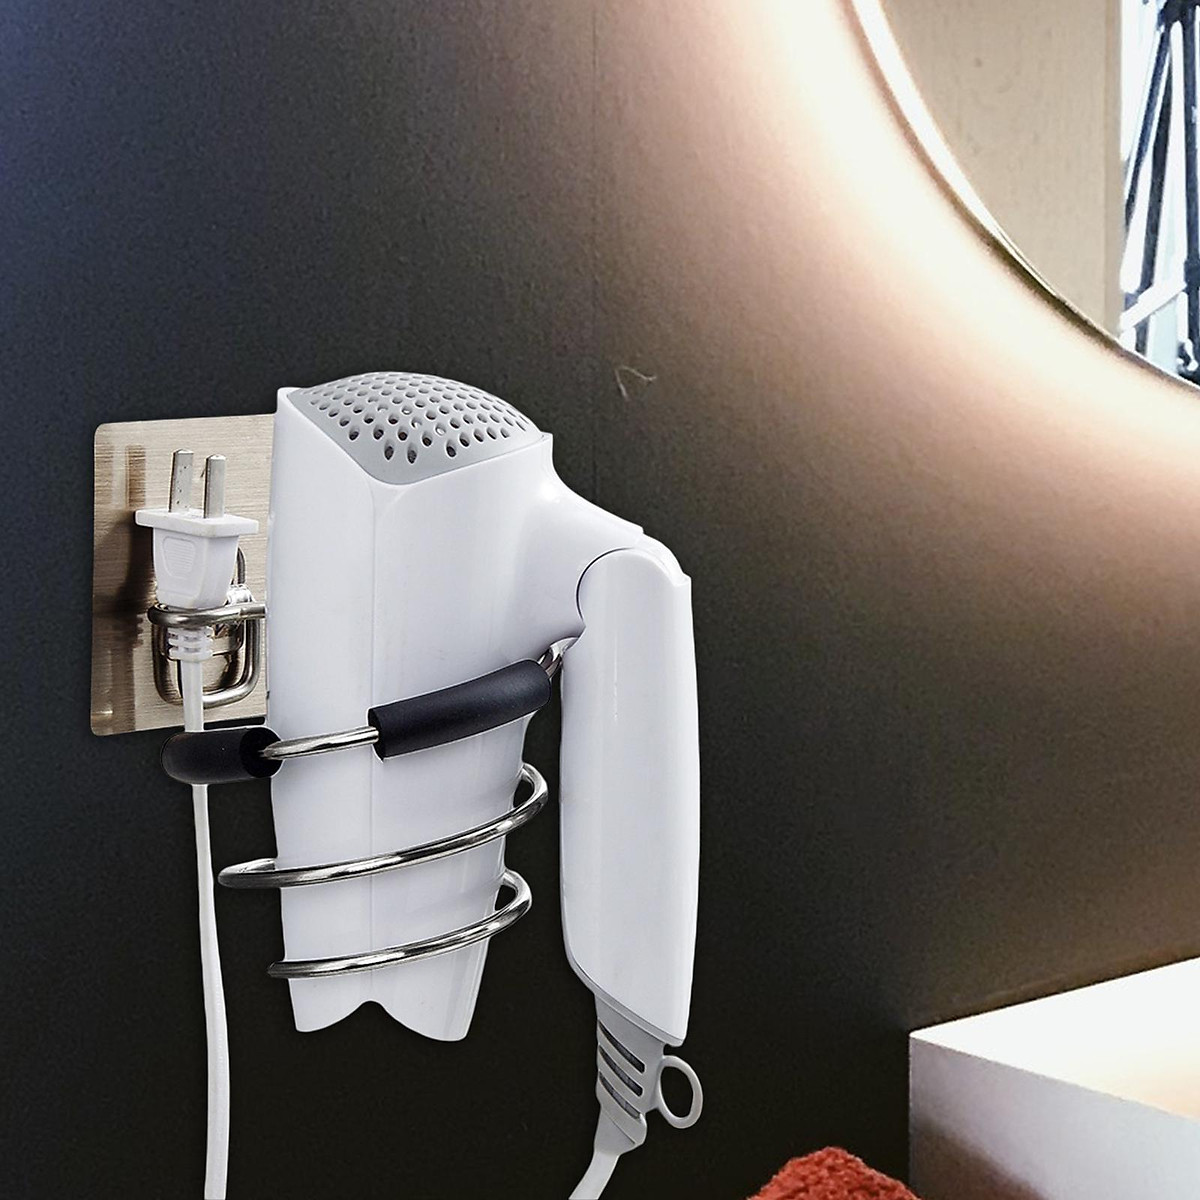 Genwec Wall Mounted Hair Dryer With Shaver Socket 1.4kW | Washroom Dryers